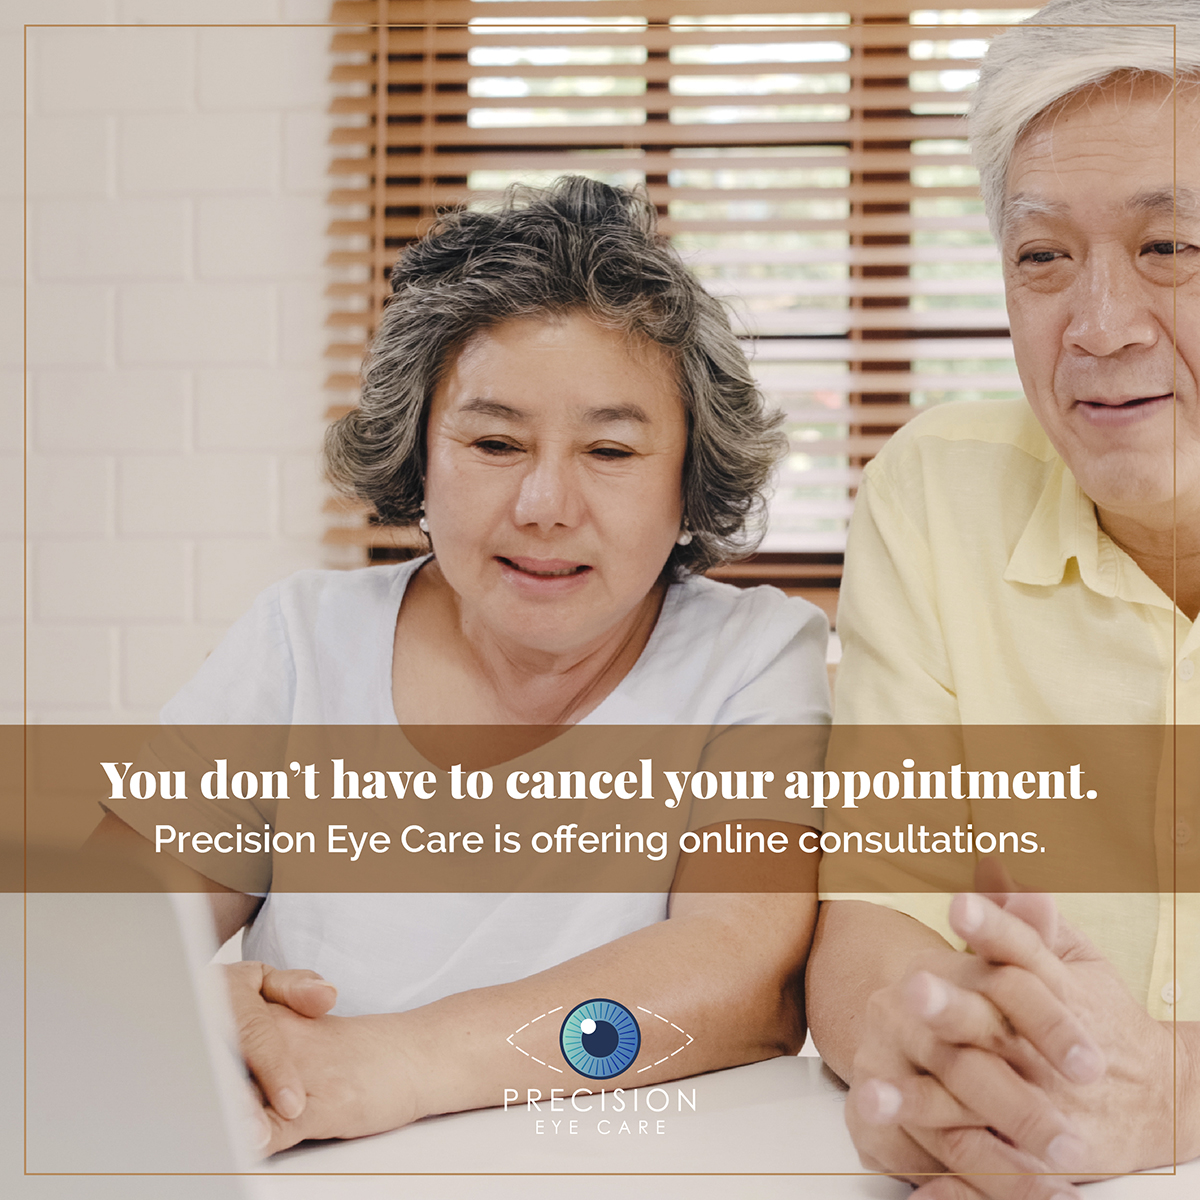 You don’t have to cancel your appointment.